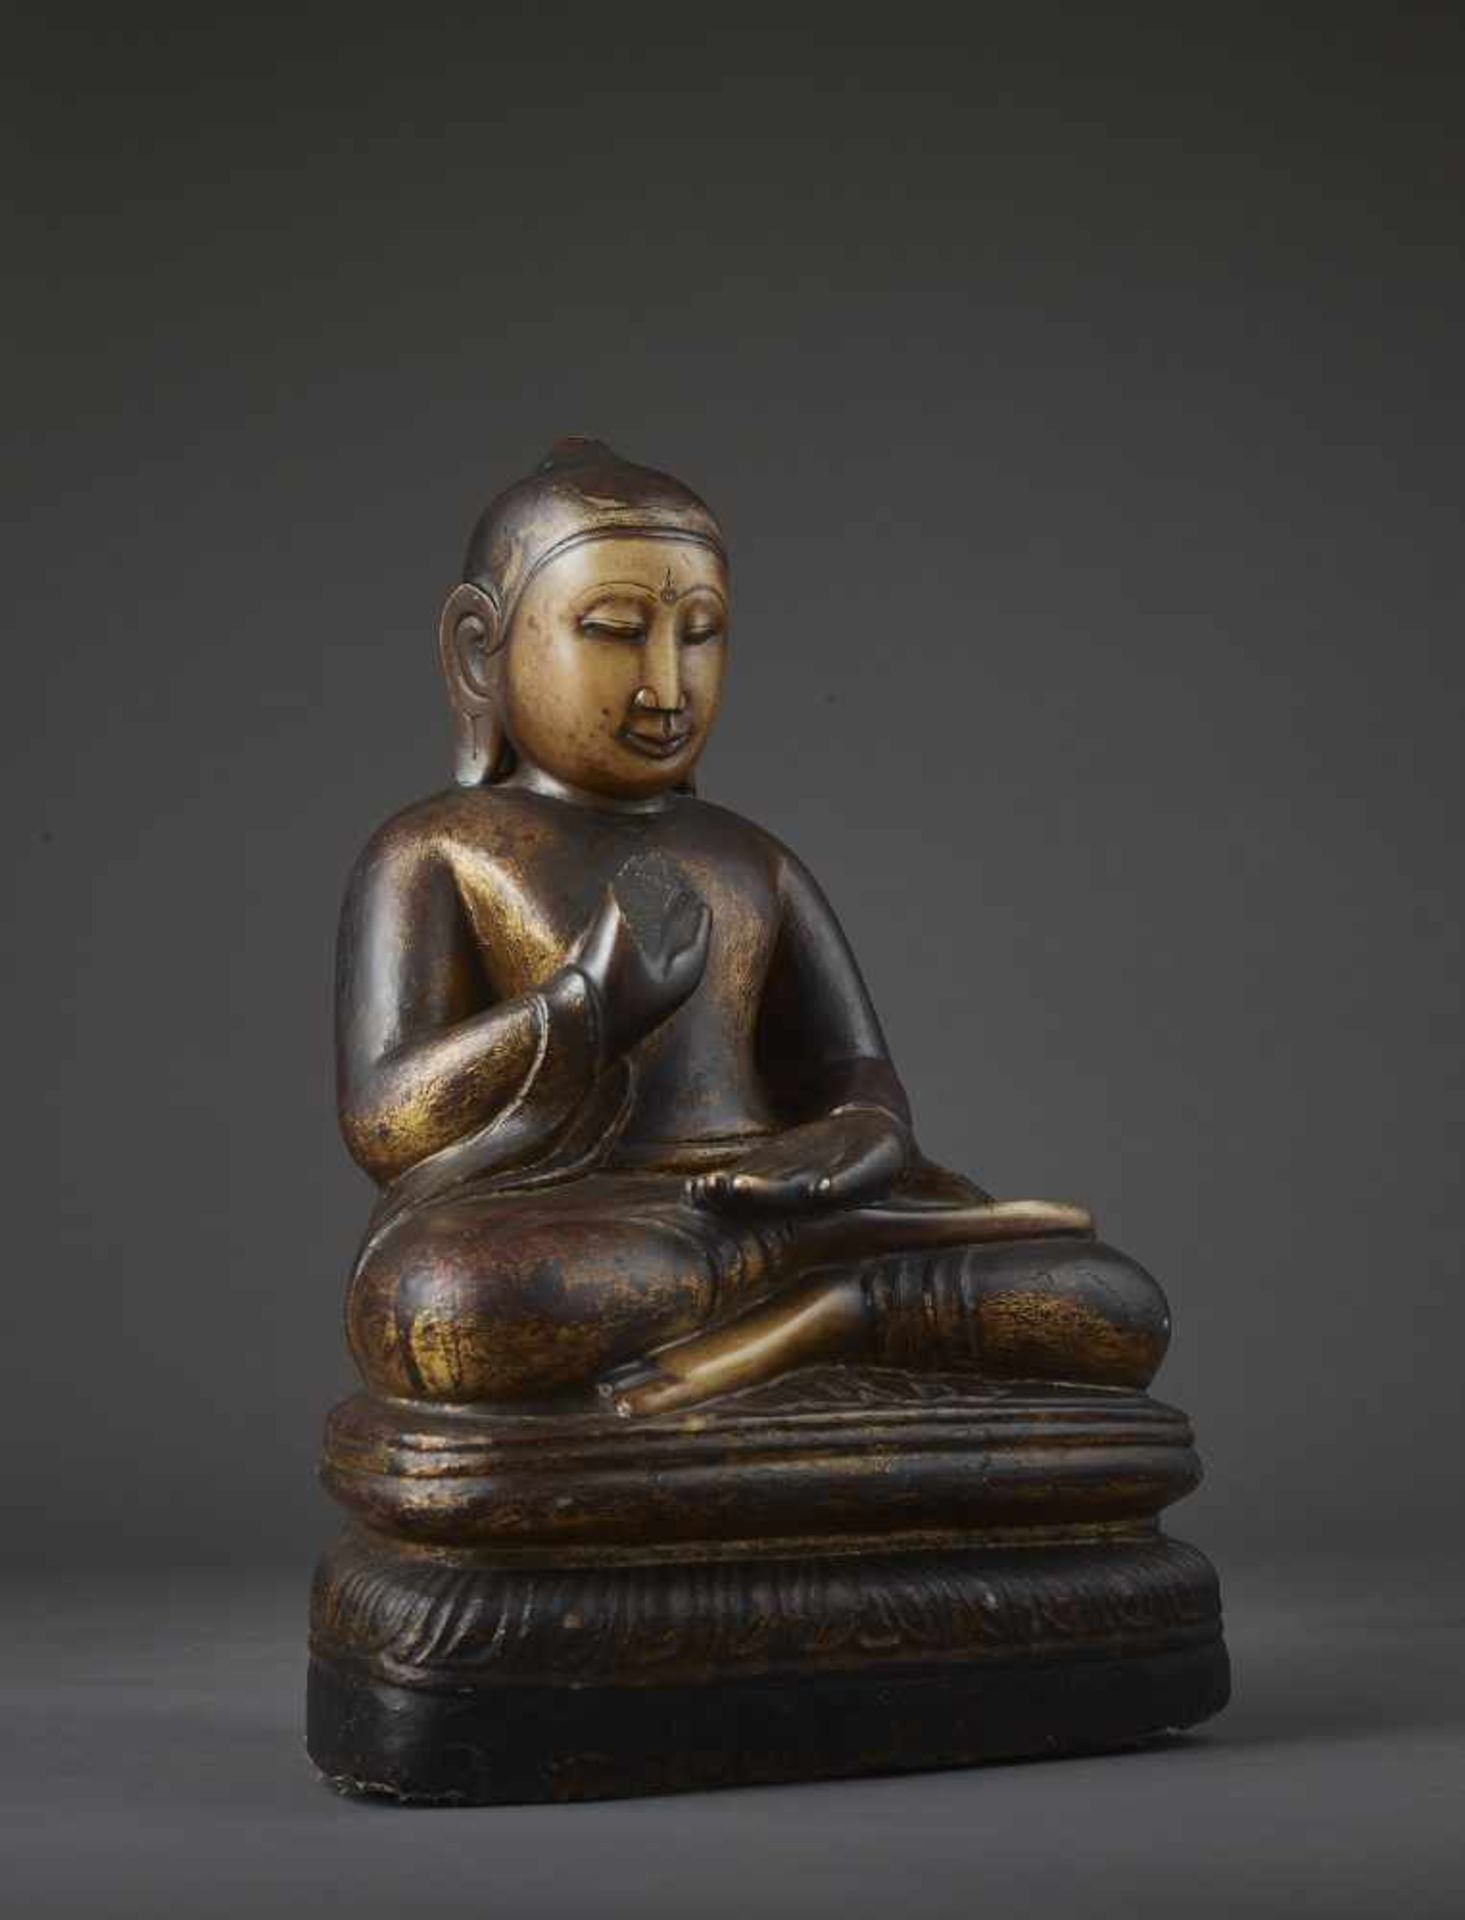 AN EARLY BURMESE MARBLE BUDDHAMyanmar, 17th - early 18th century. Shan style. Serene portrayal of - Image 6 of 6